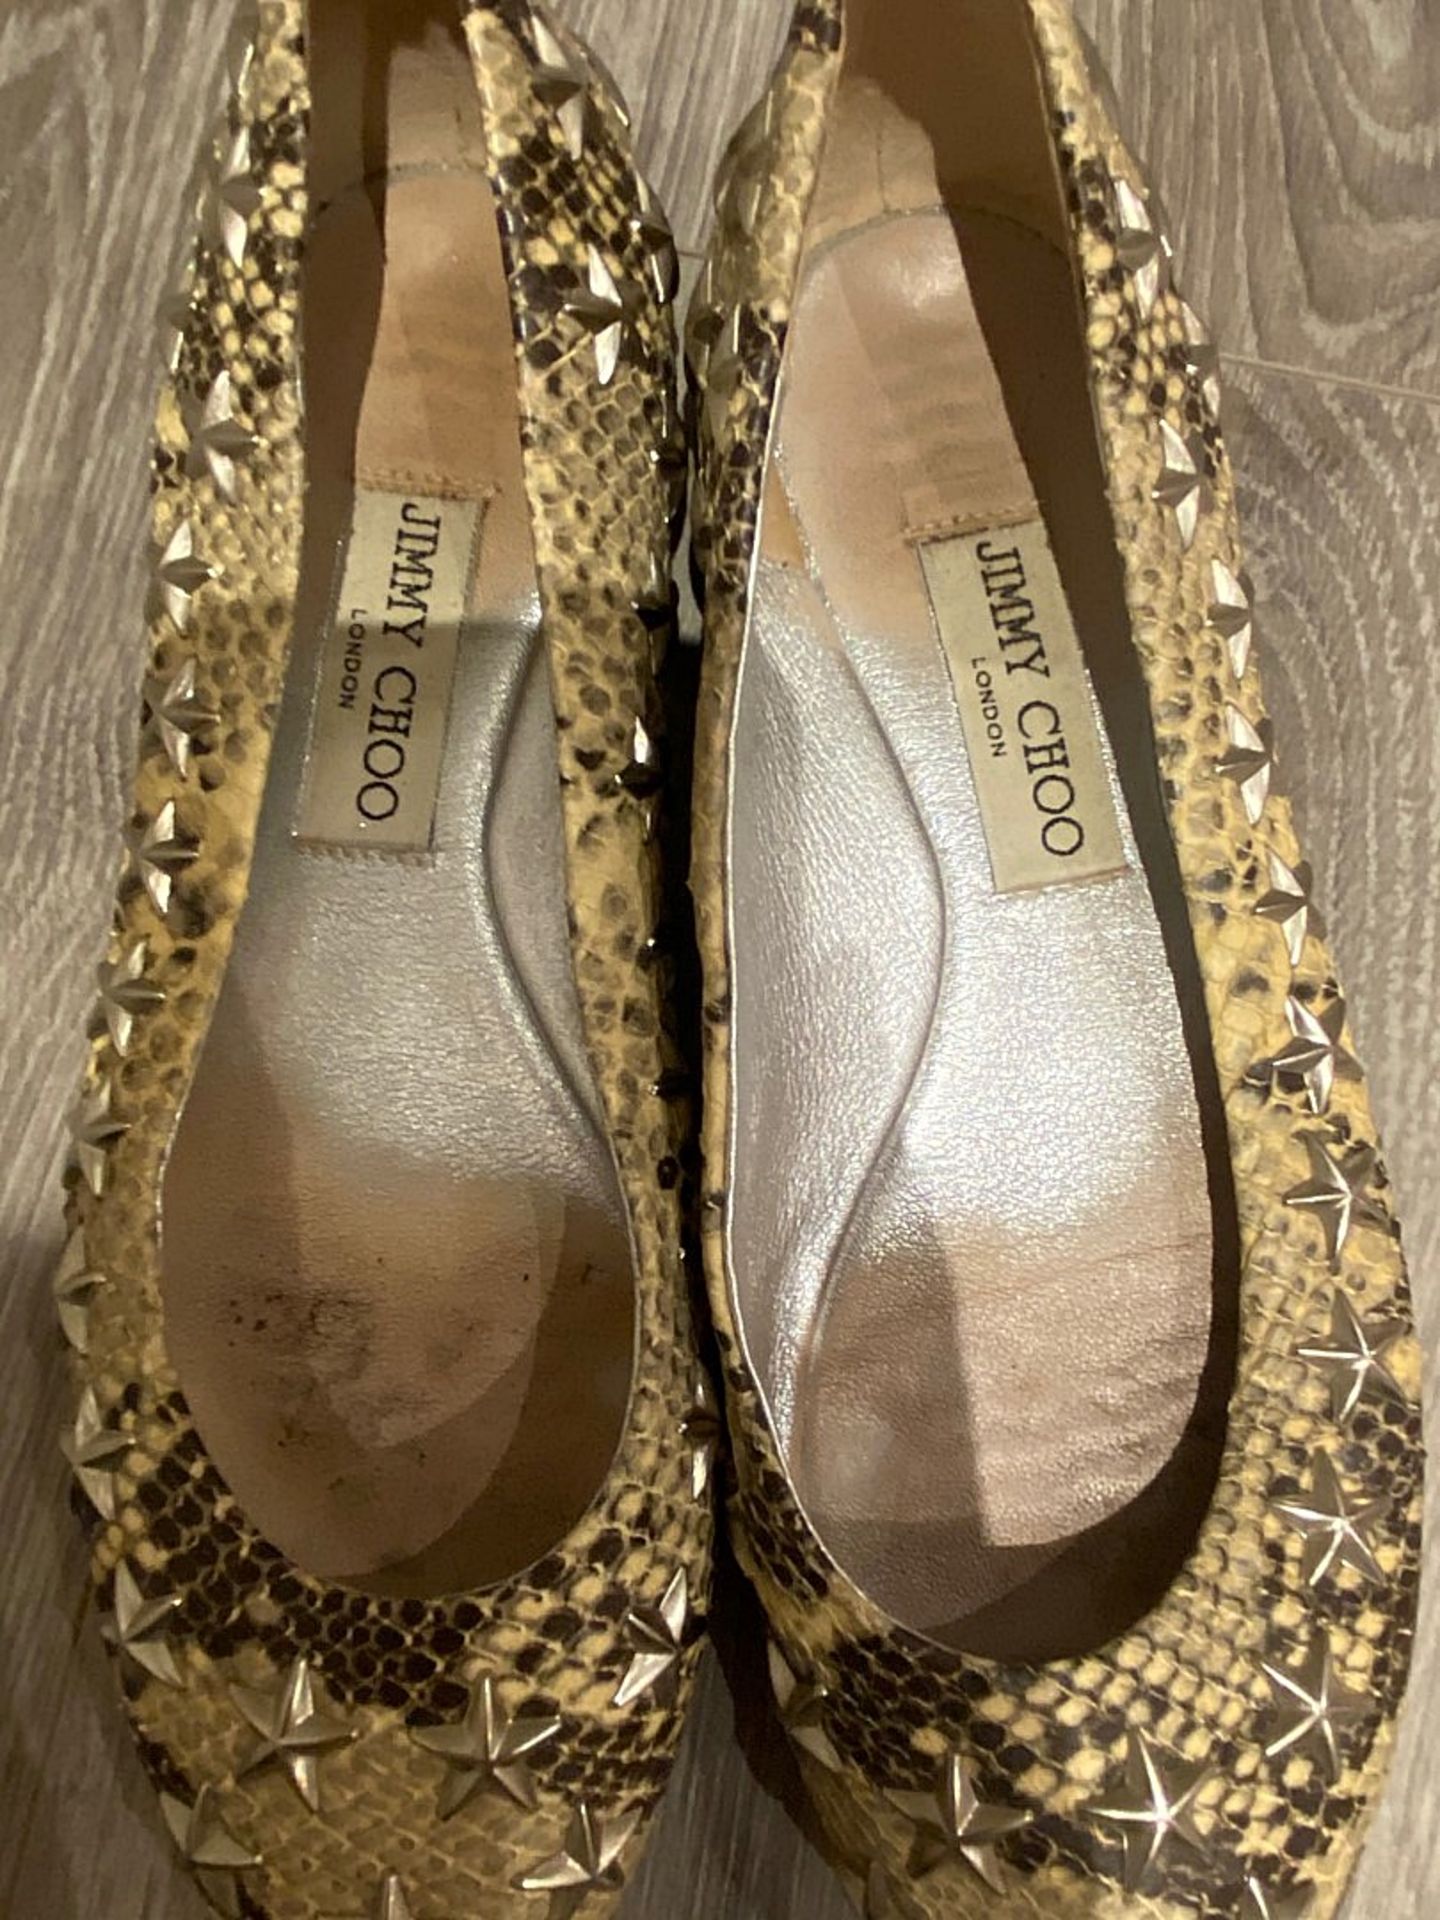 1 x Pair Of Genuine Jimmy Choo Flats In Snake Print - Size: 36 - Preowned in Very Good Condition - R - Image 3 of 3